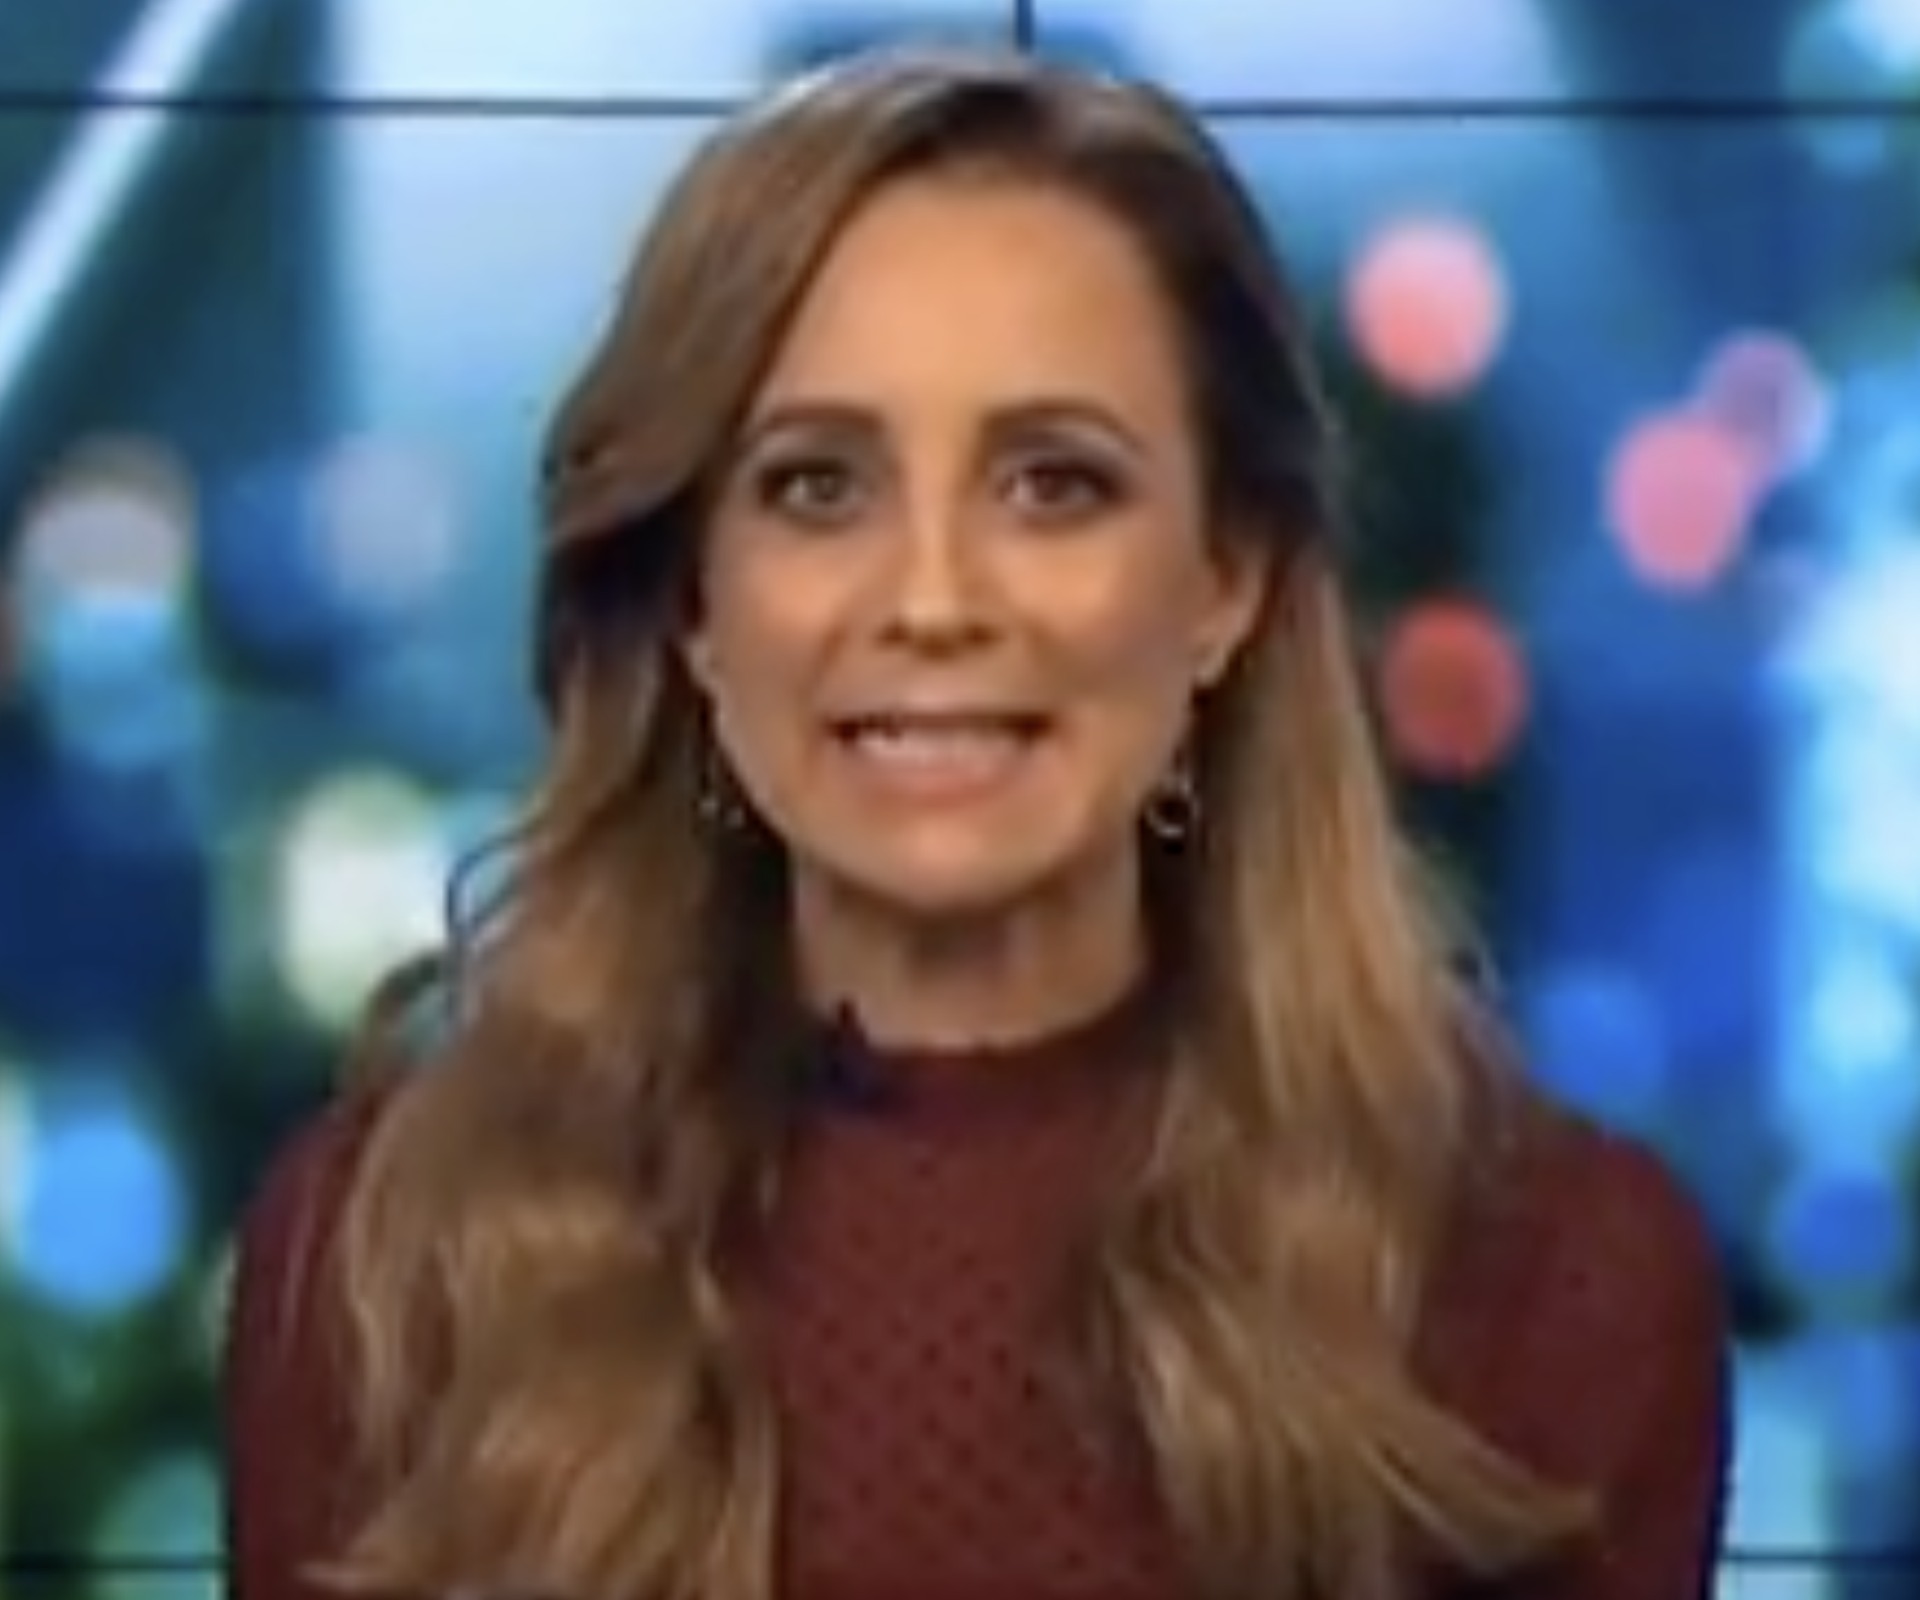 Carrie Bickmore, The Project